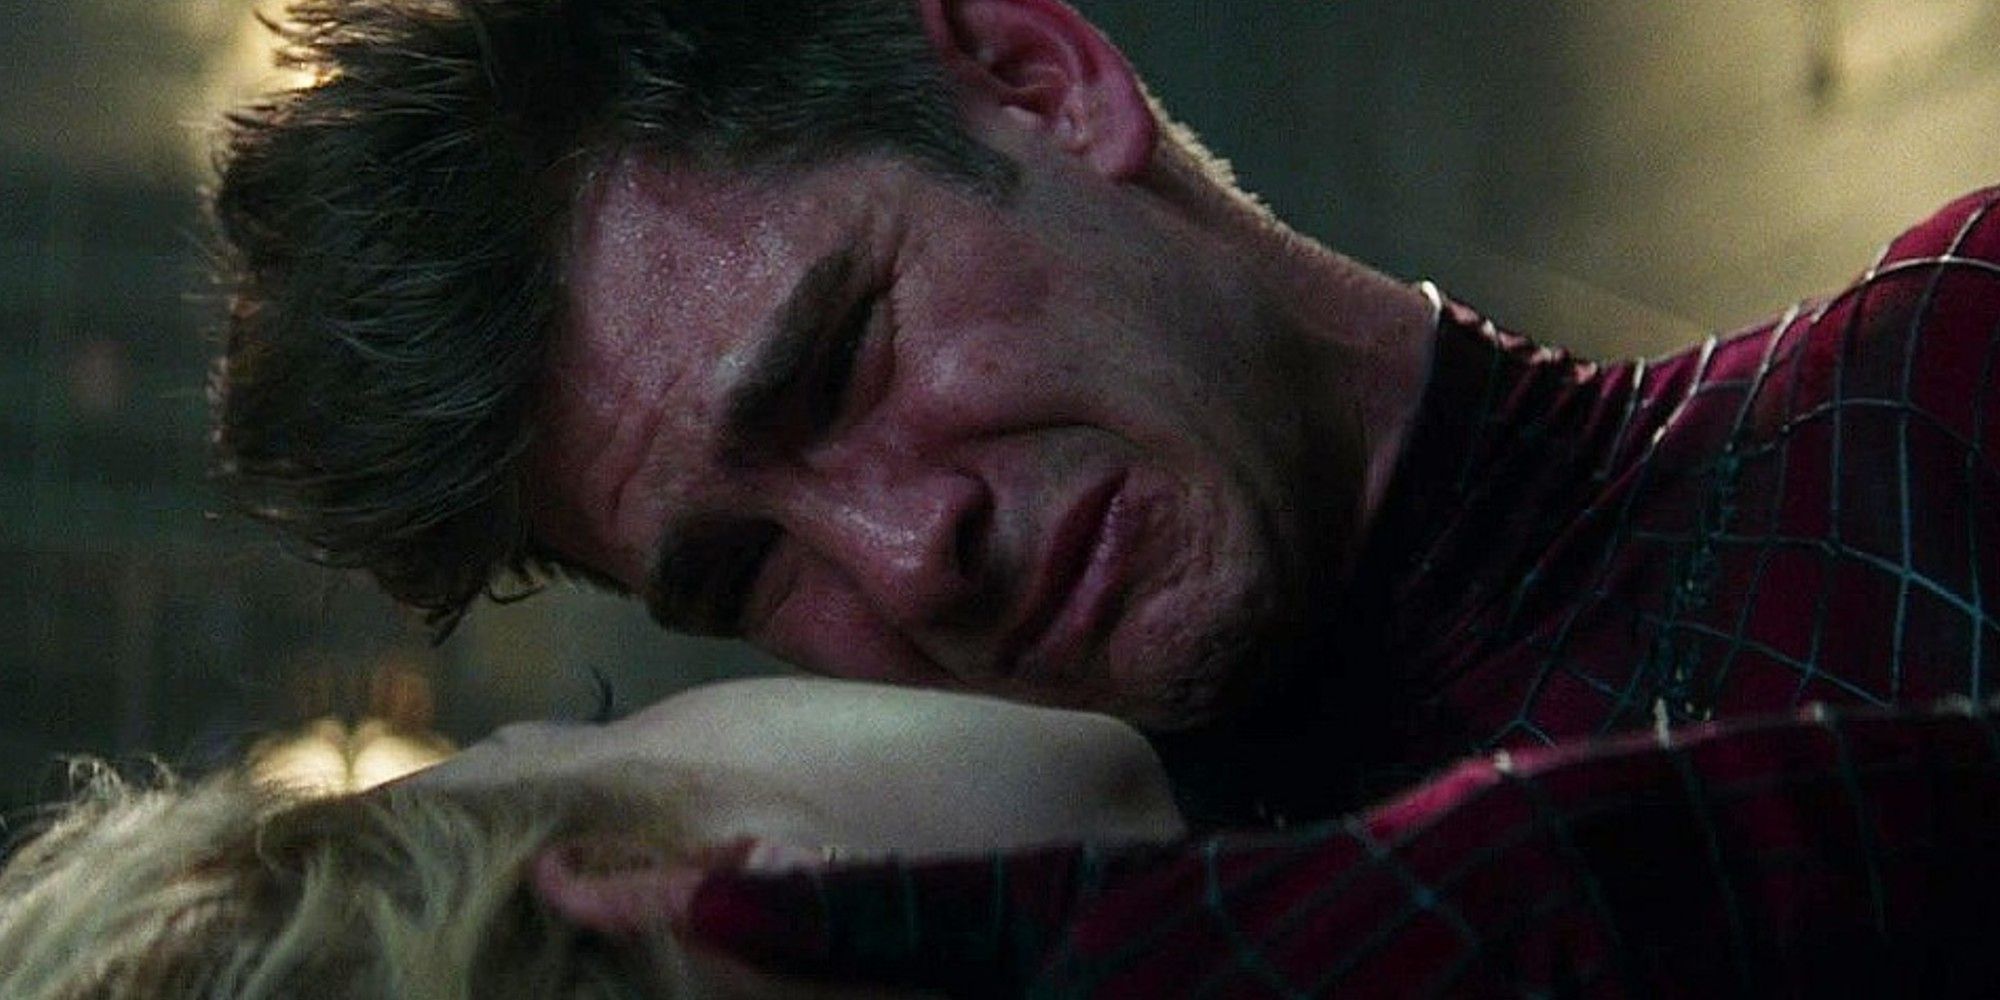 Peter crying over Gwen's body in The Amazing Spider-Man 2